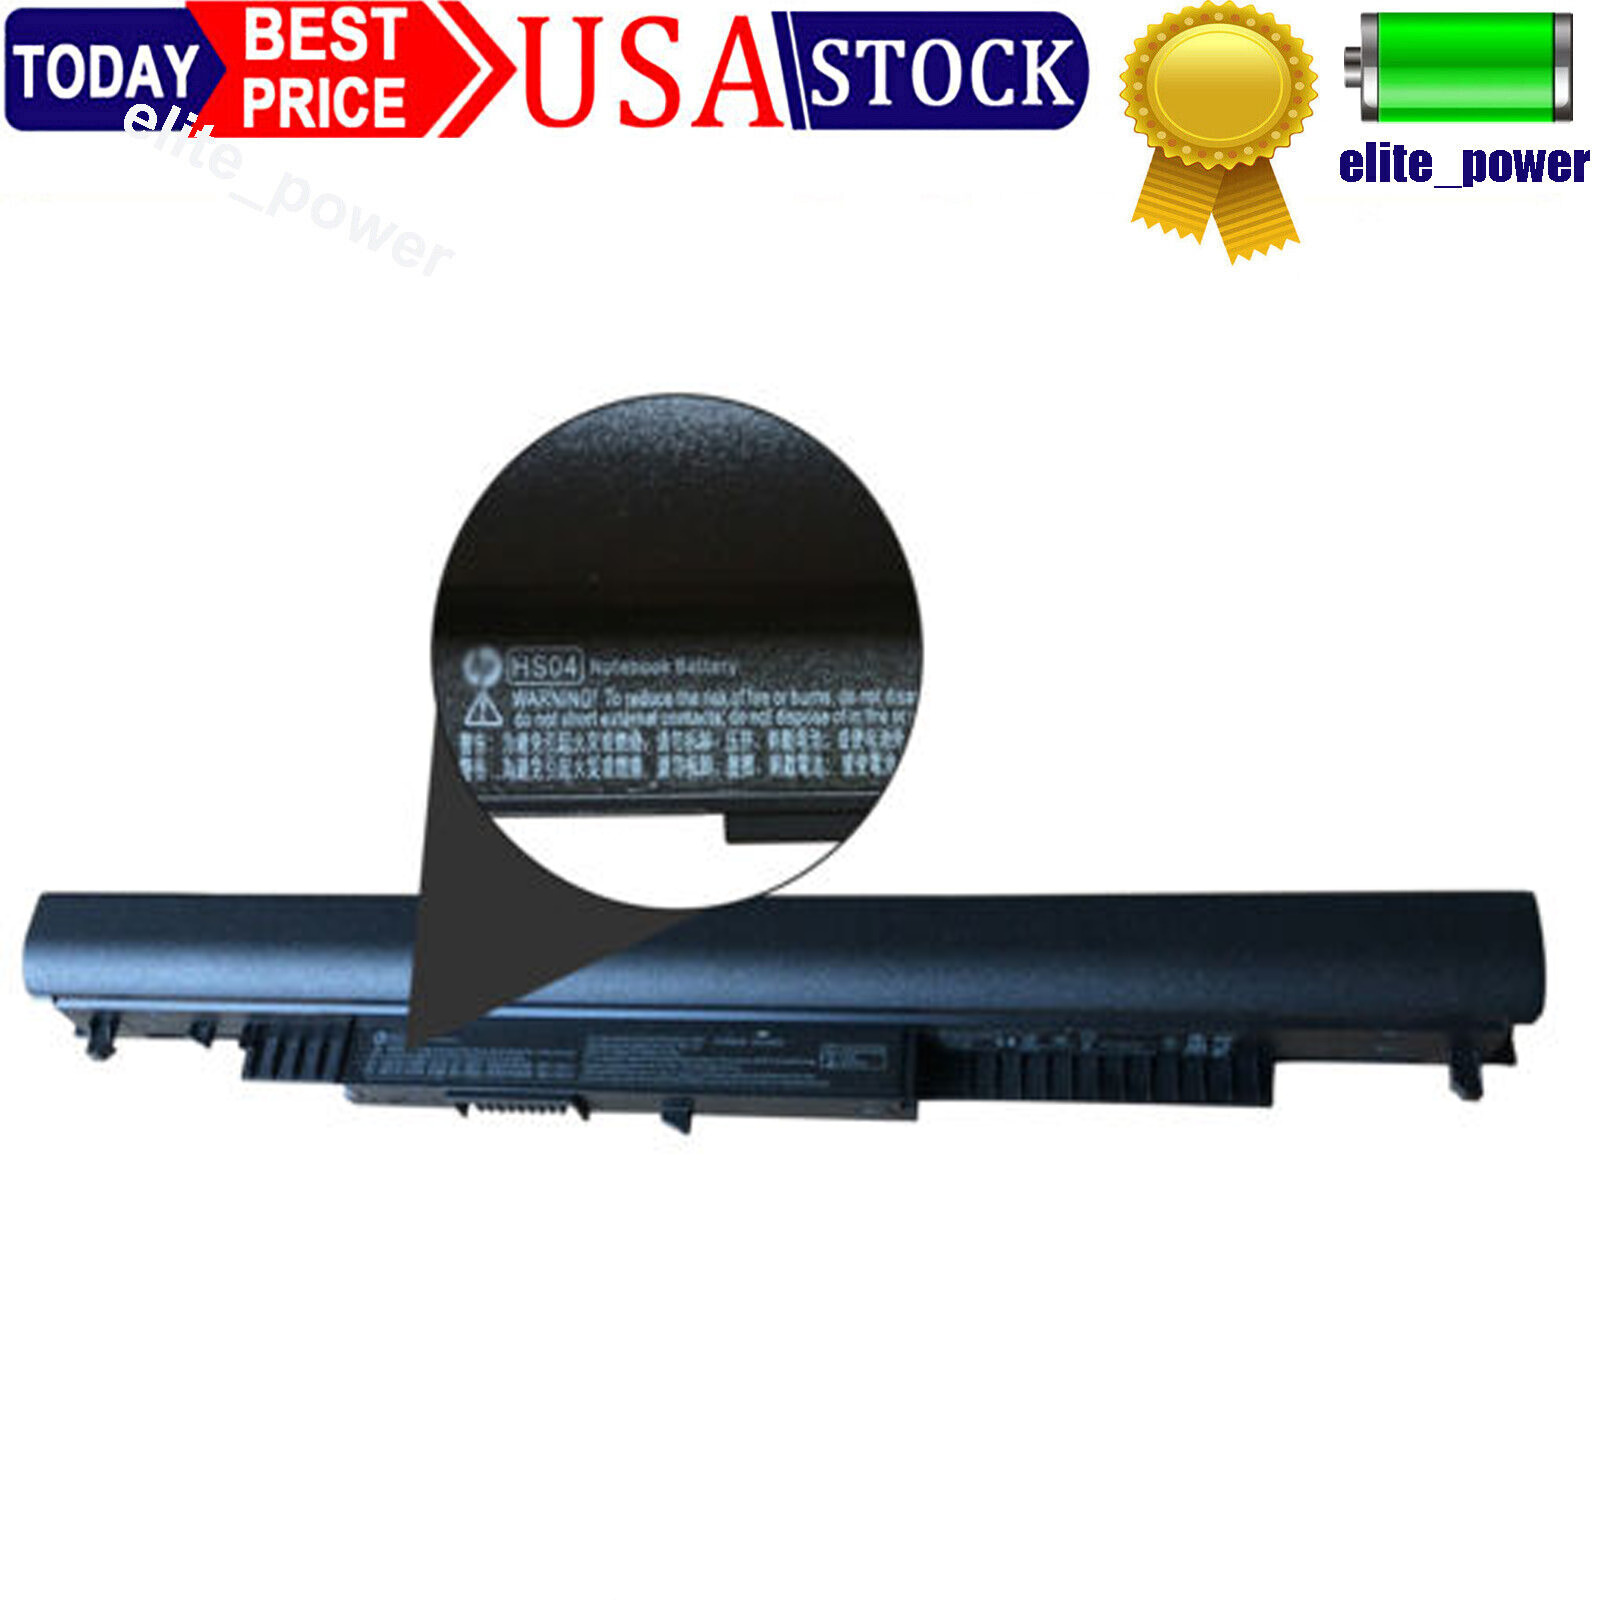 HS03 HS04 Laptop Spare Battery for HP Spare 807957-001 807956-001 807612-421 